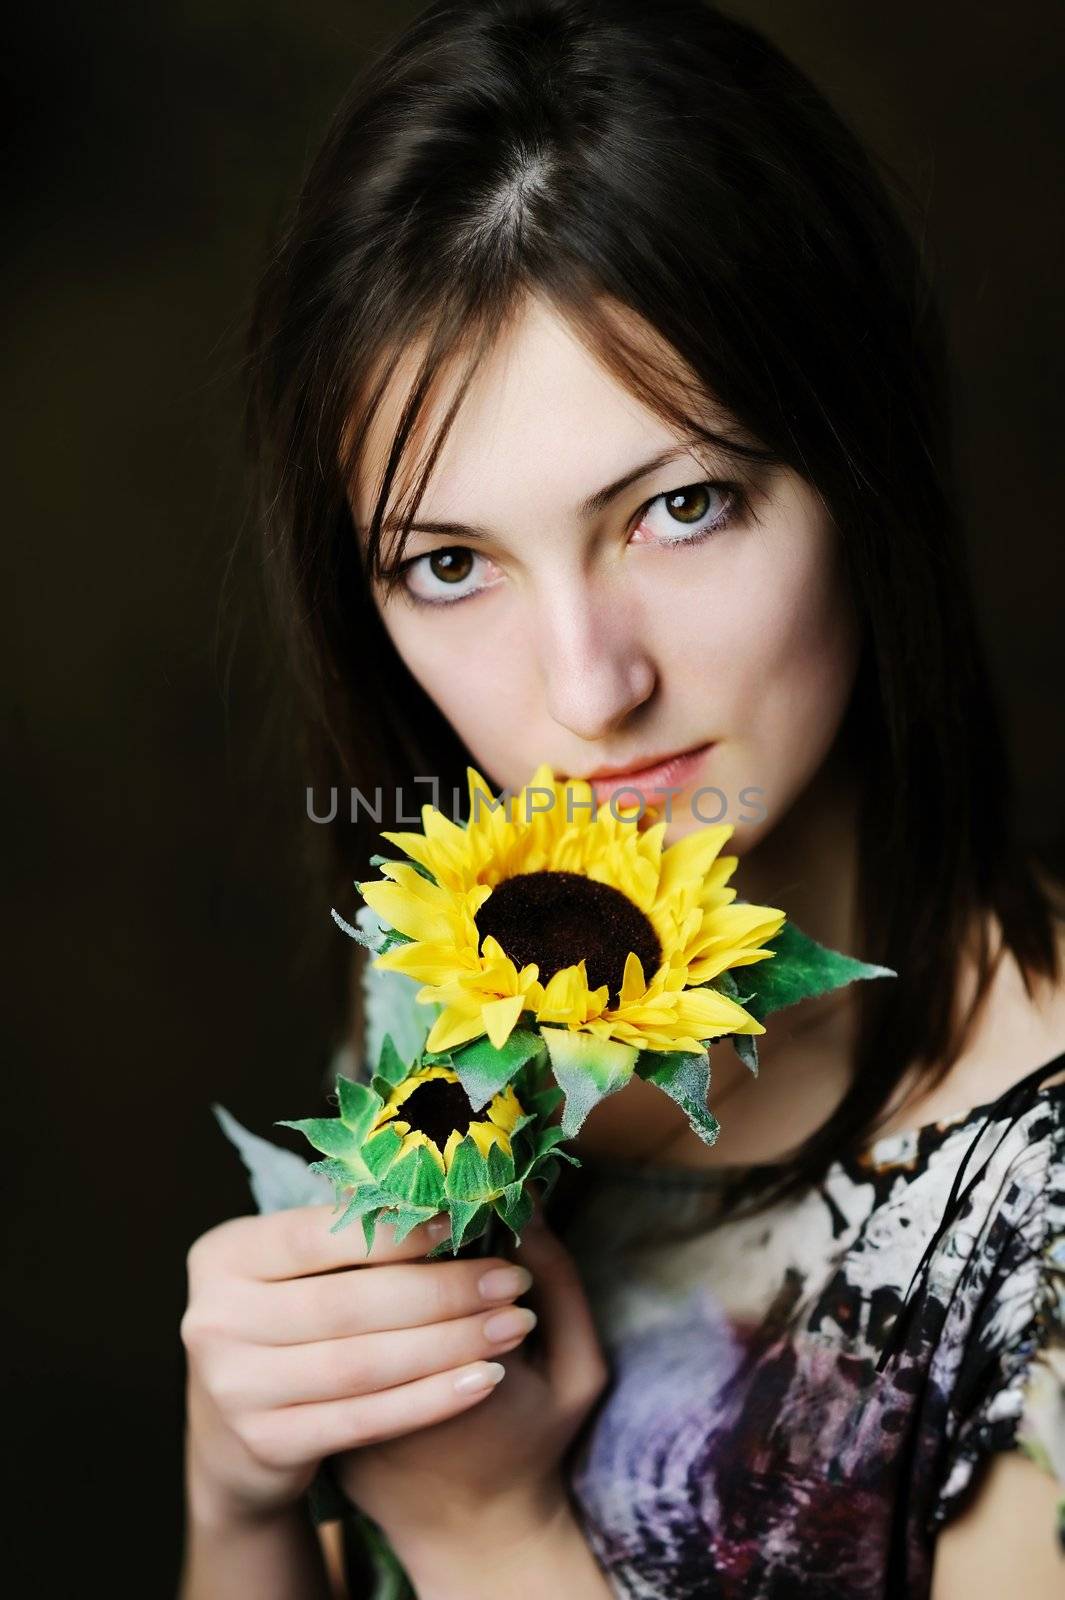 An image of a beautiful woman with sunflower